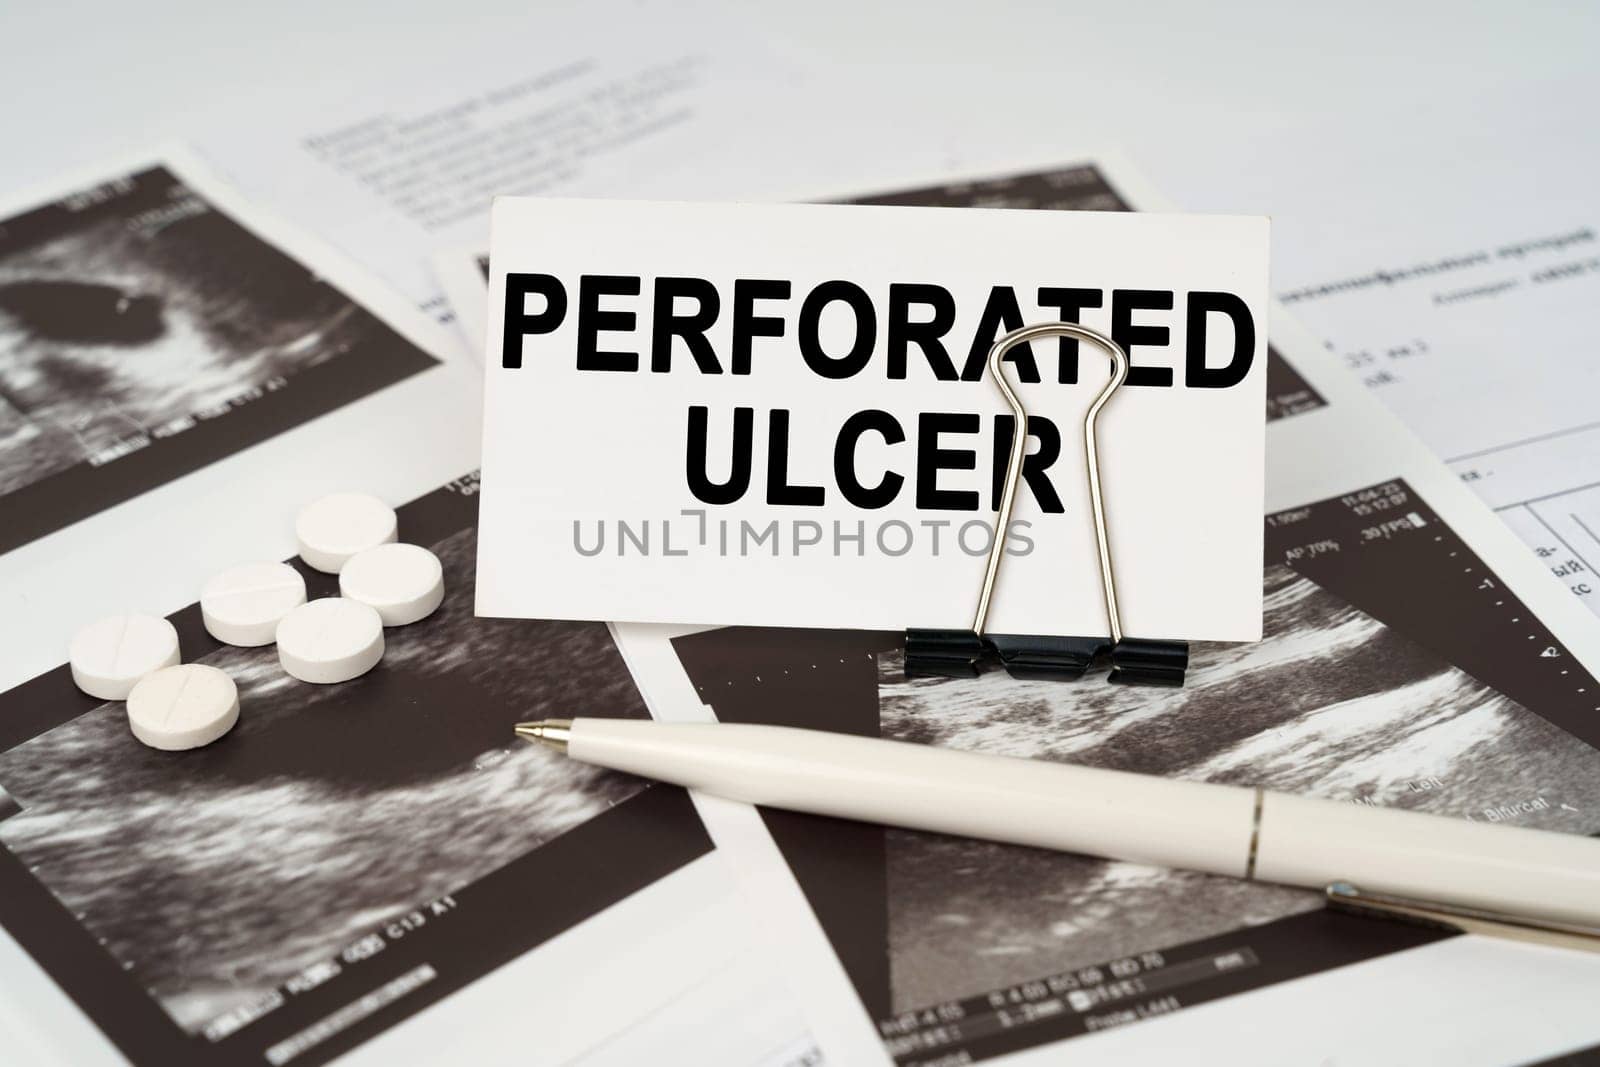 On the ultrasound pictures there is a pen and a business card with the inscription - Perforated ulcer by Sd28DimoN_1976